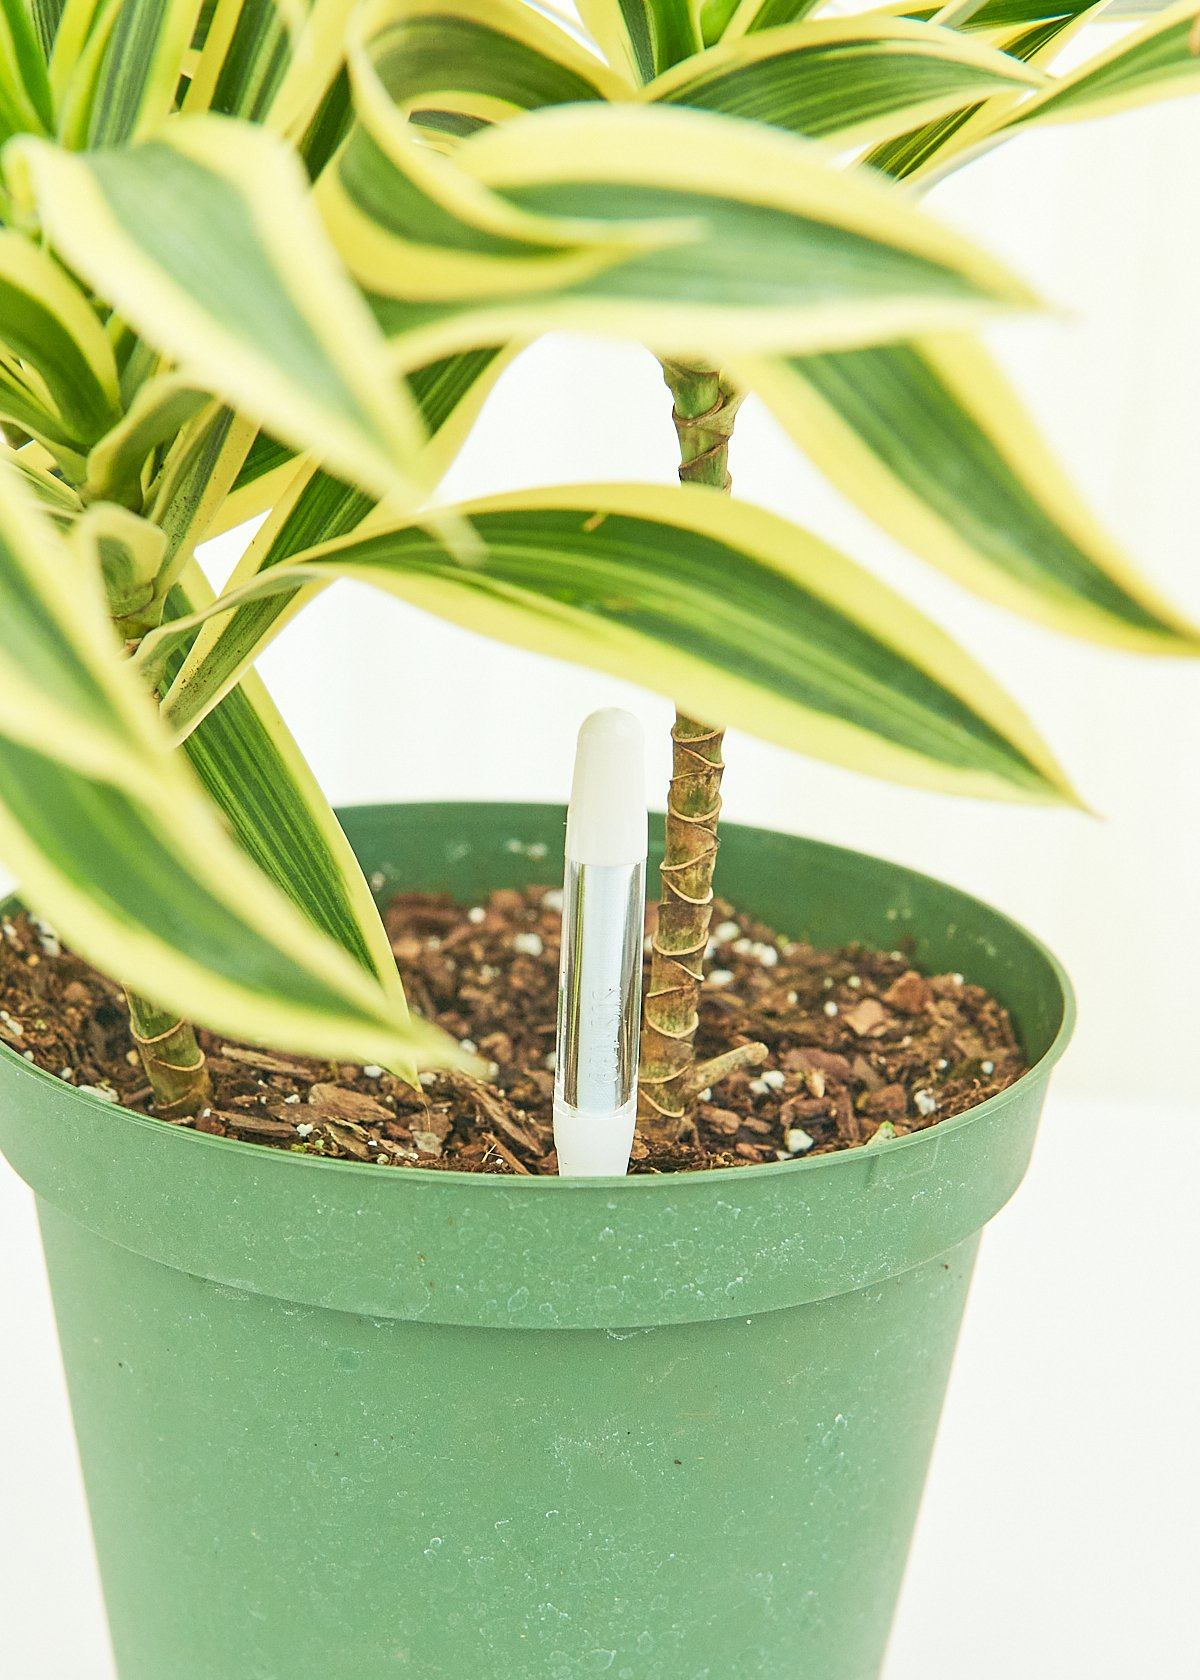 Mid range photo of Moisture Meter in a pot with a plant